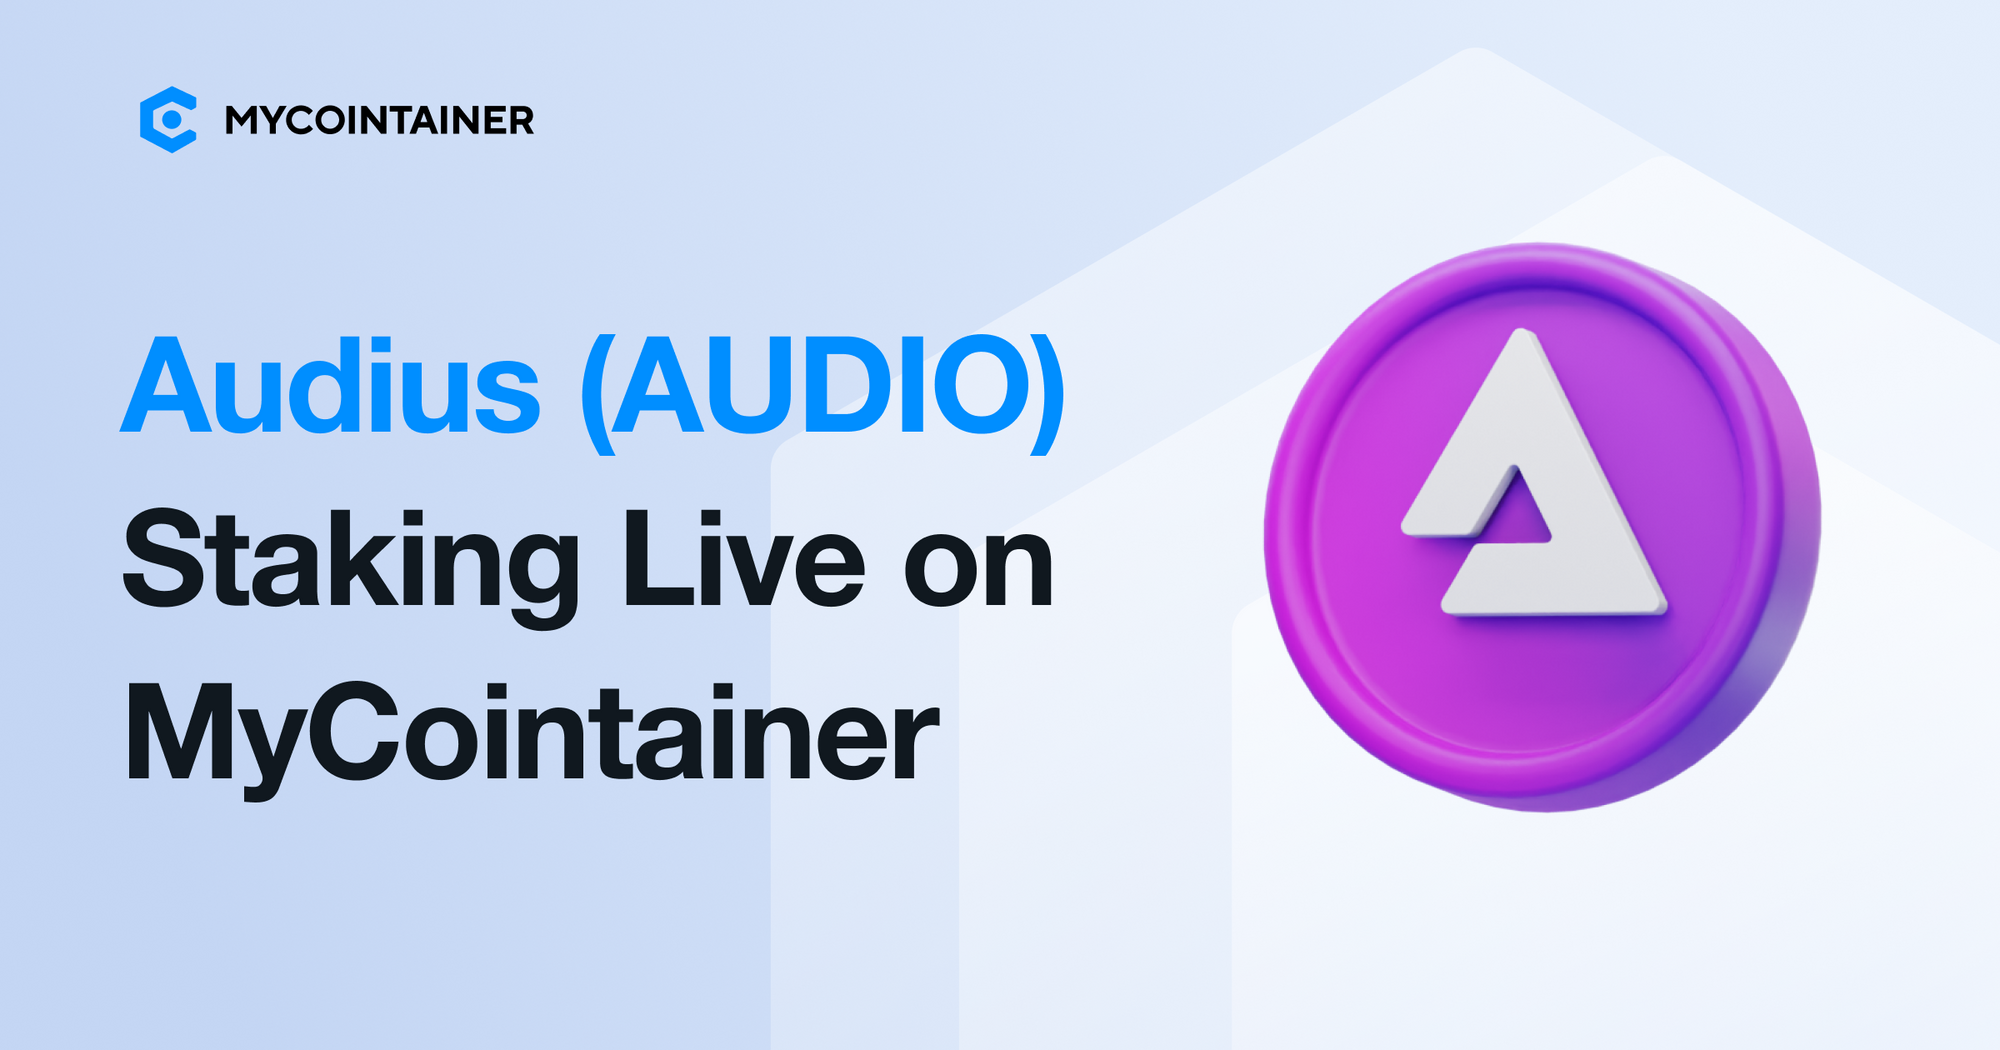 Audius Staking Live on MyCointainer